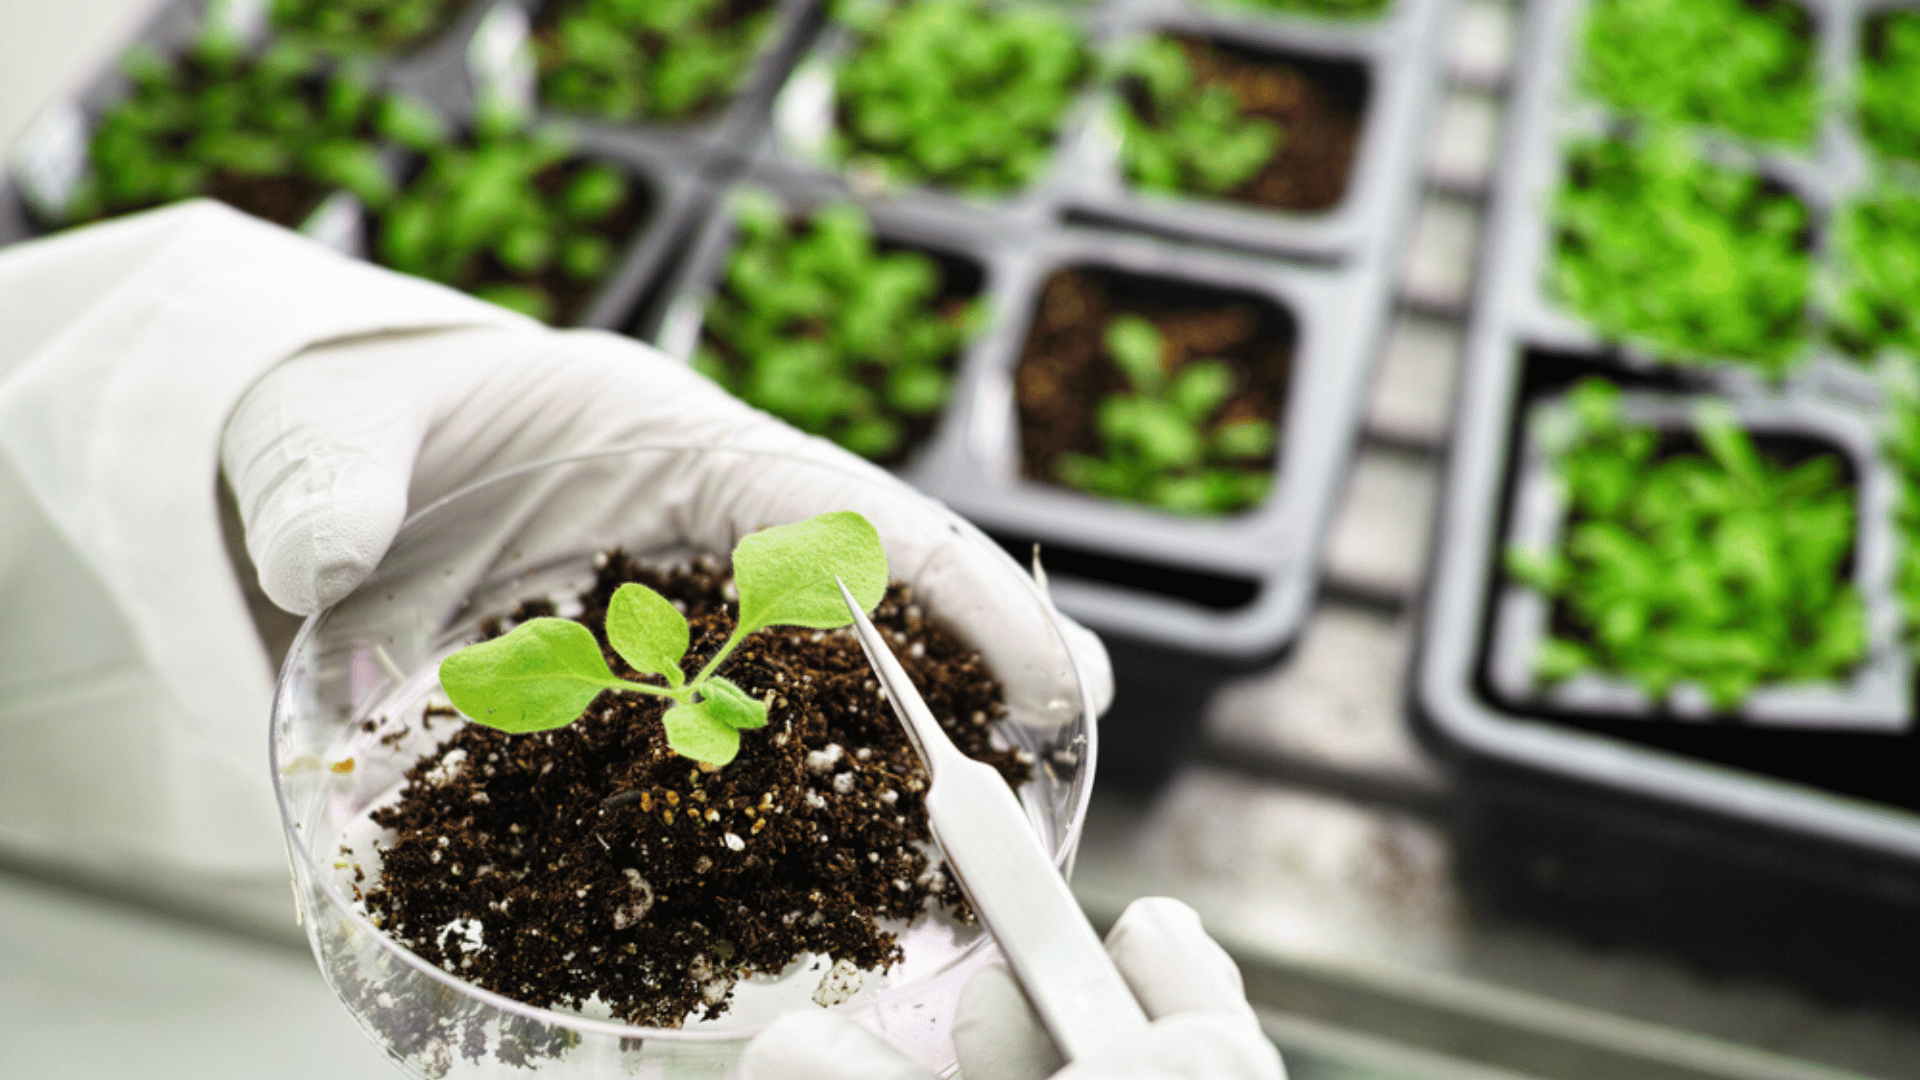 New Study Genetically Engineers Plants to Change Color When Exposed to Pesticide